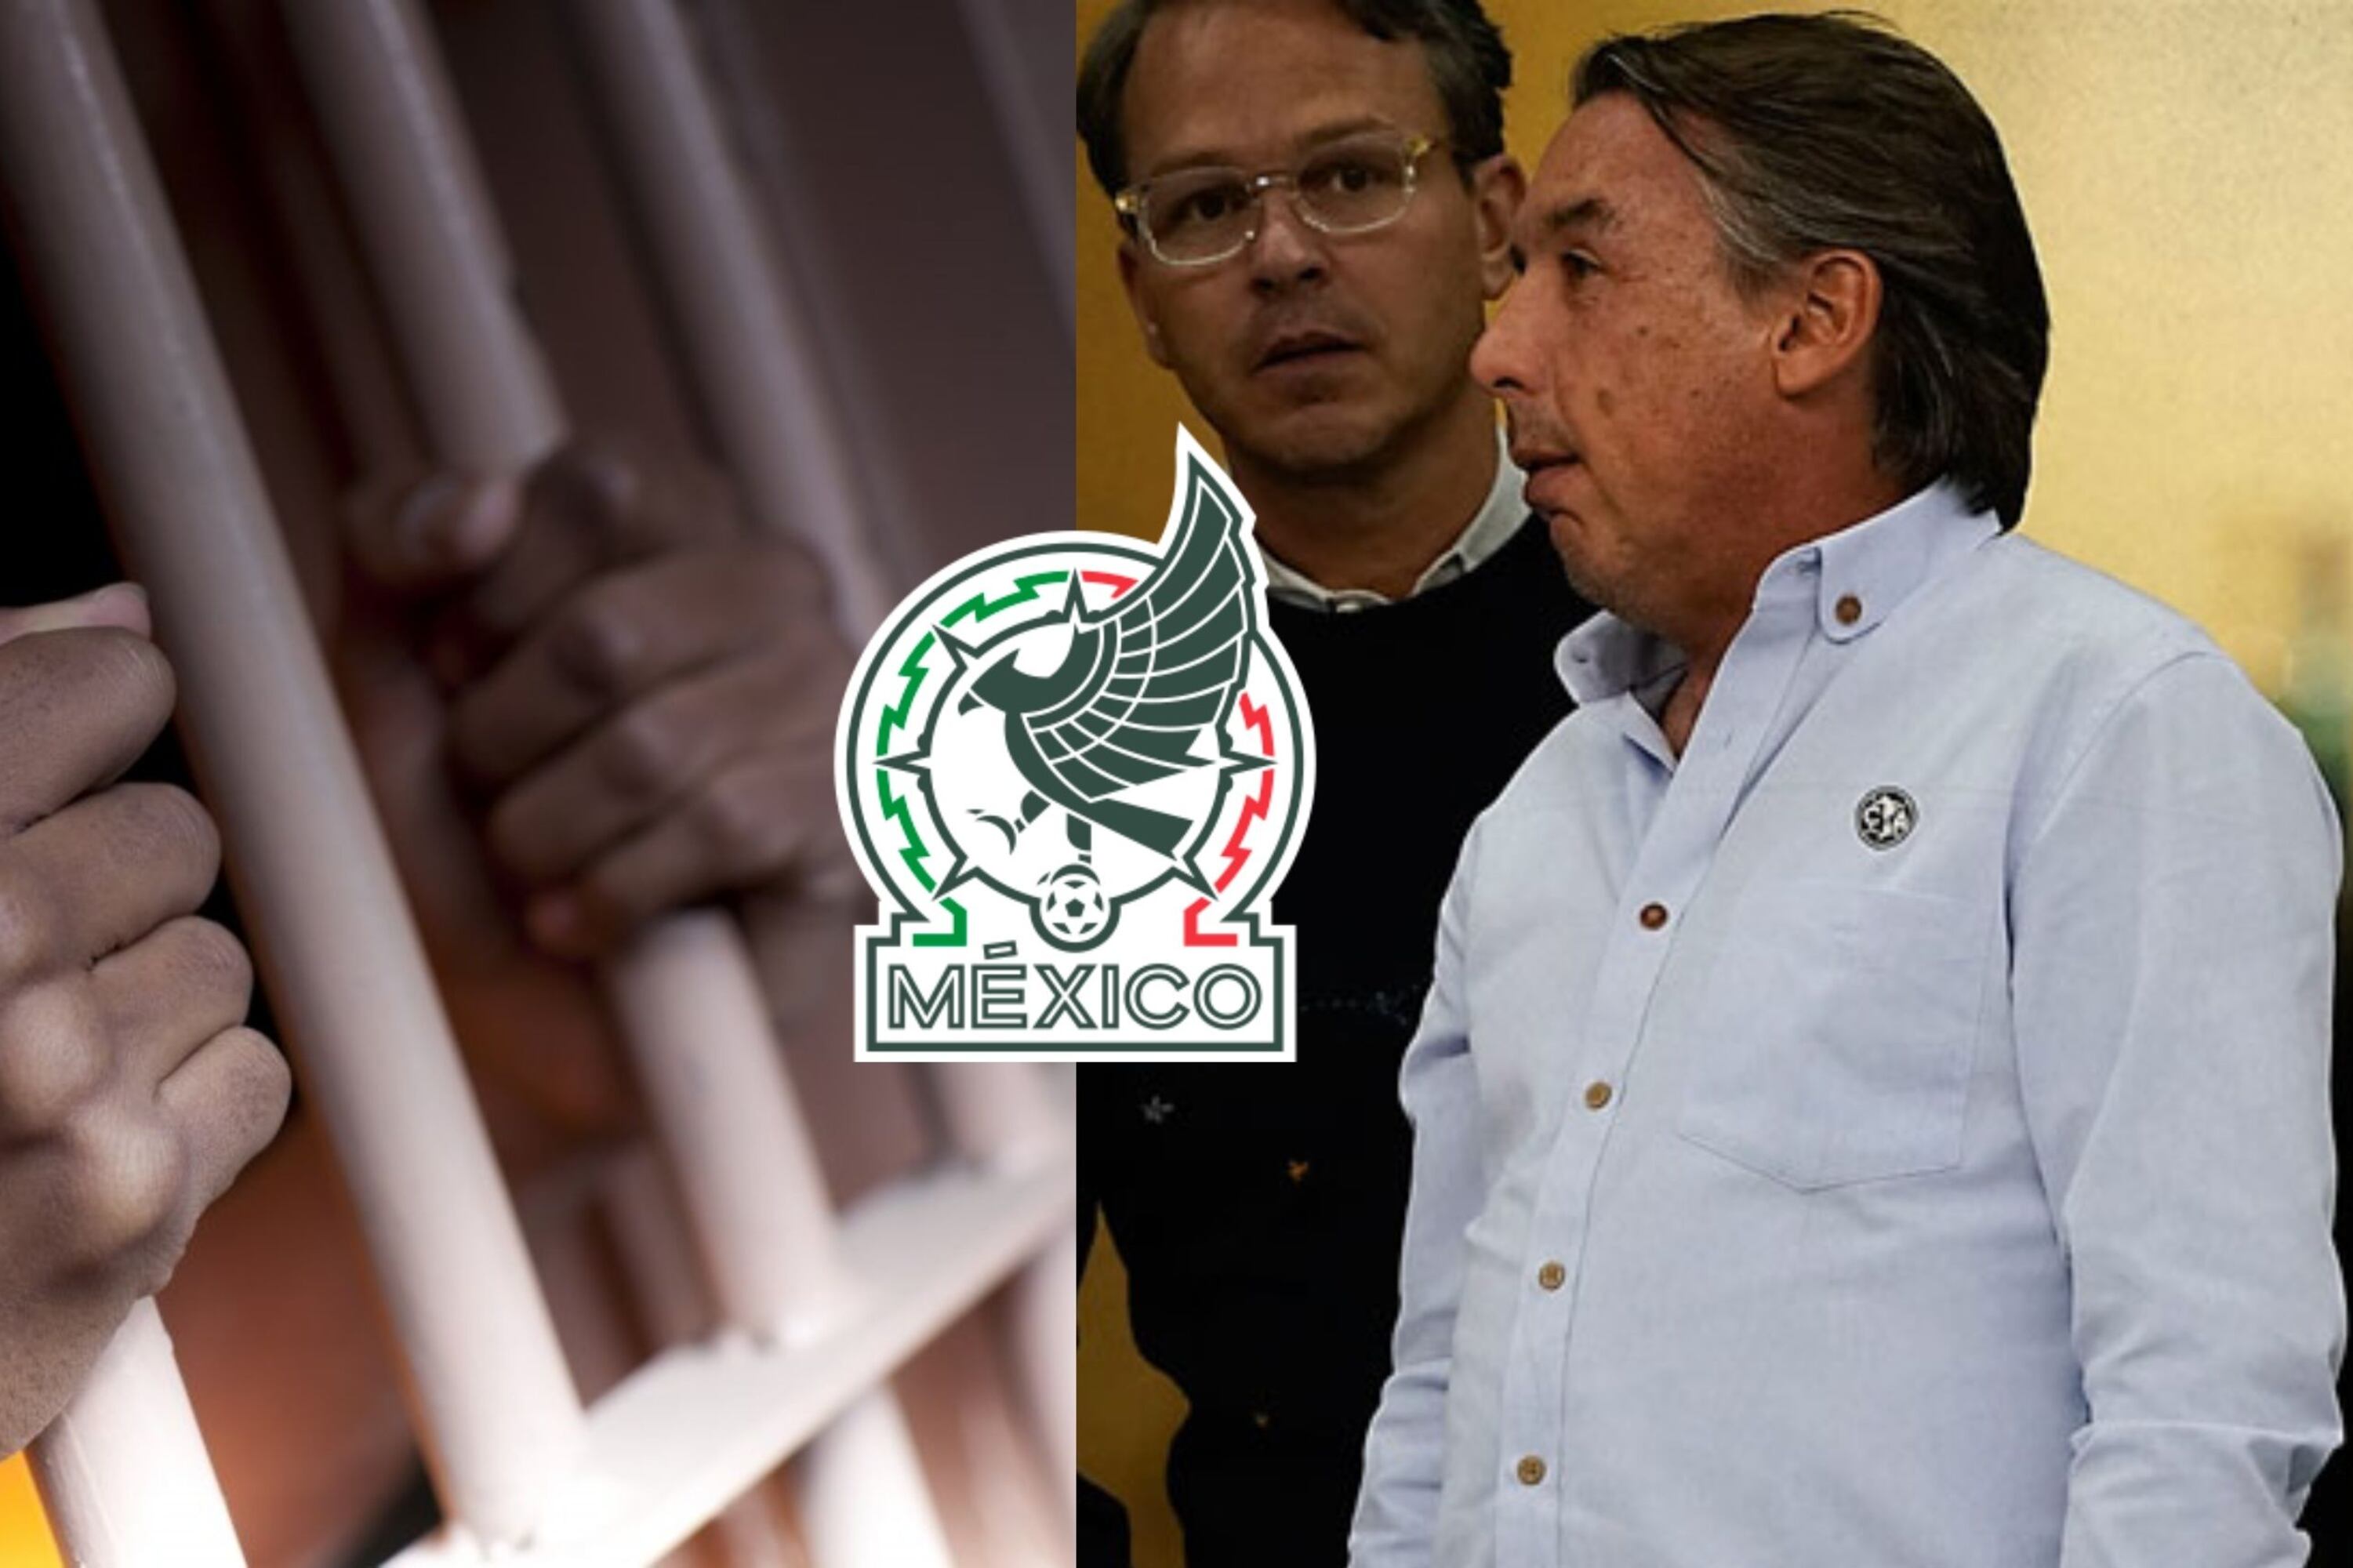 He was the worst thing that ever happened to El Tri, but Azcarraga backed him, now he would go to prison